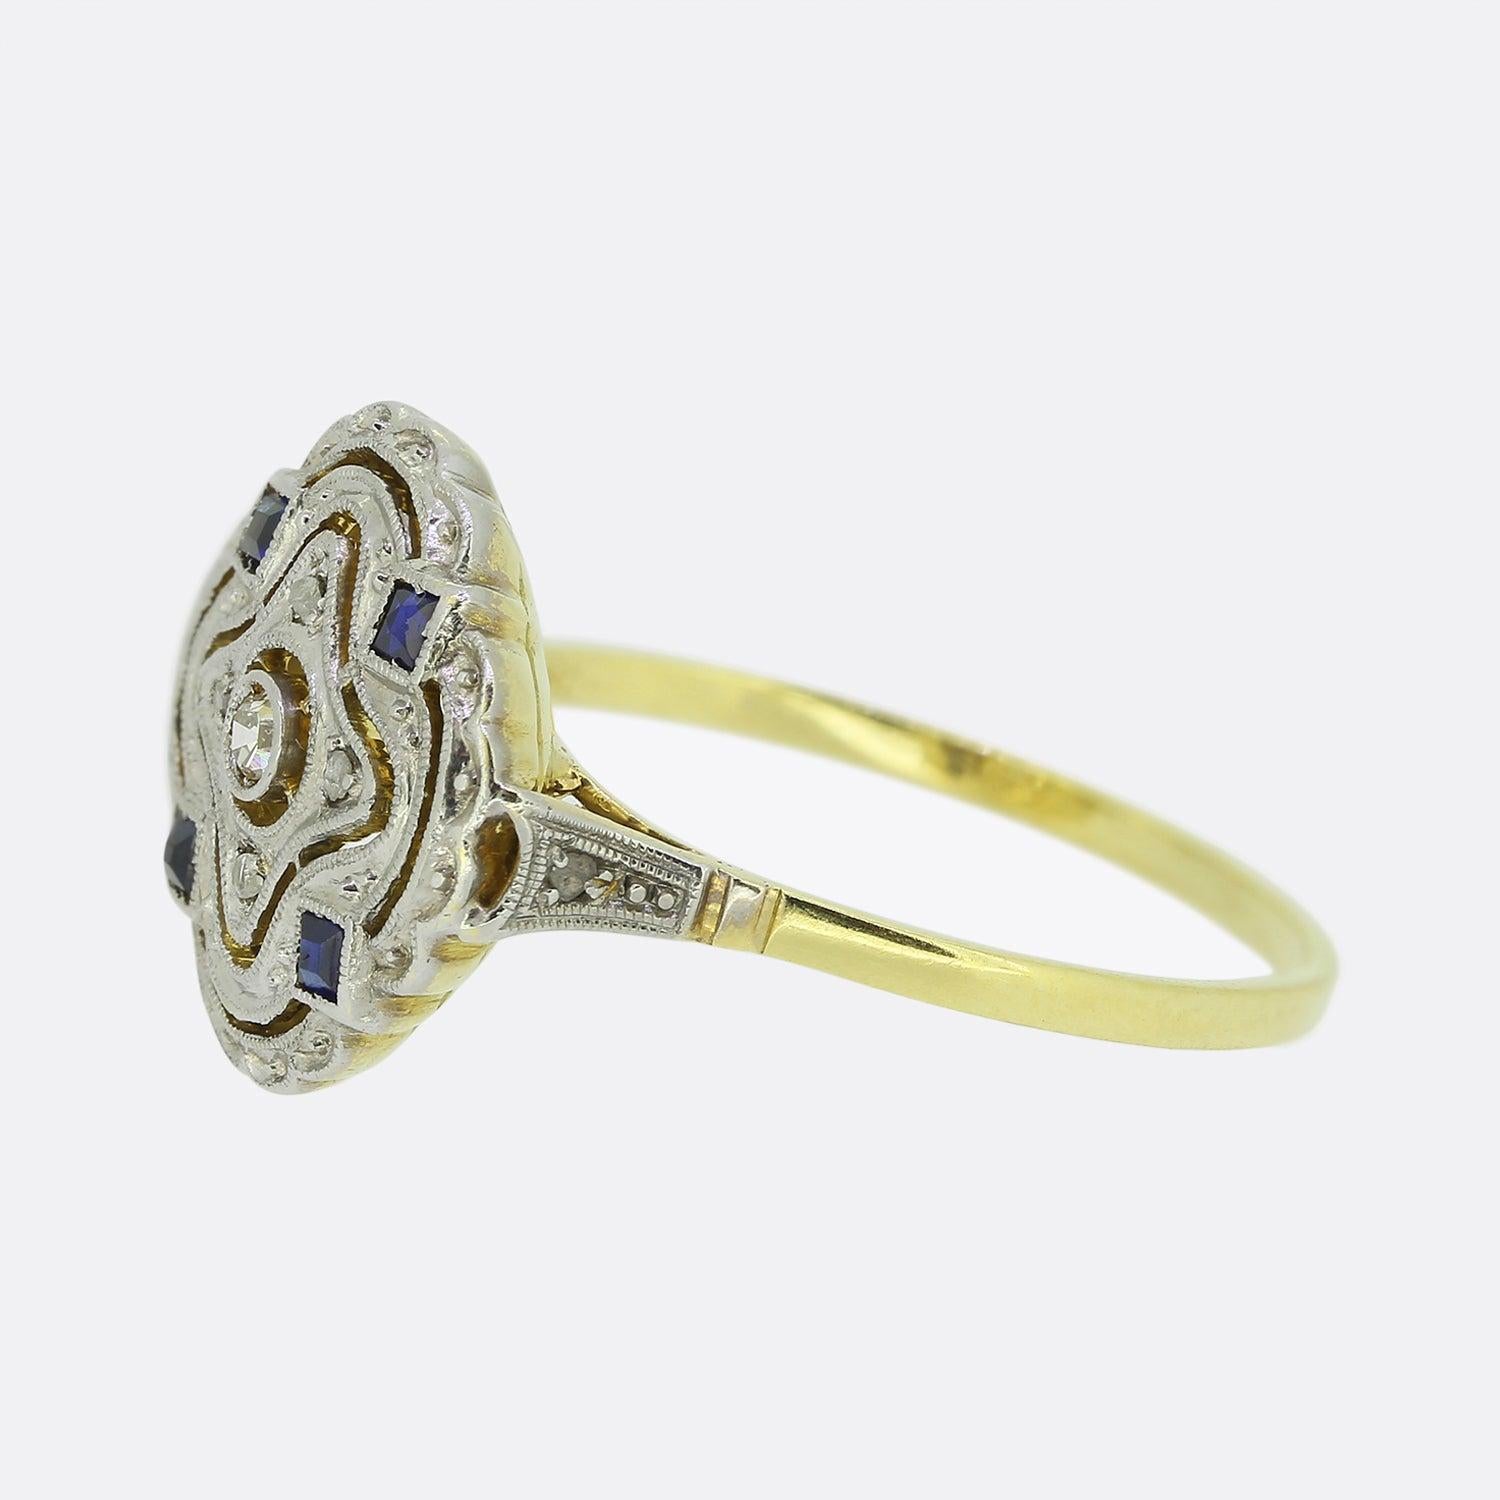 Here we have a excellently crafted sapphire and diamond plaque ring from a time when the Art Deco style was at the height of design. At the centre of the face we find a single round faceted old cut diamond which is surrounded by a trio of open